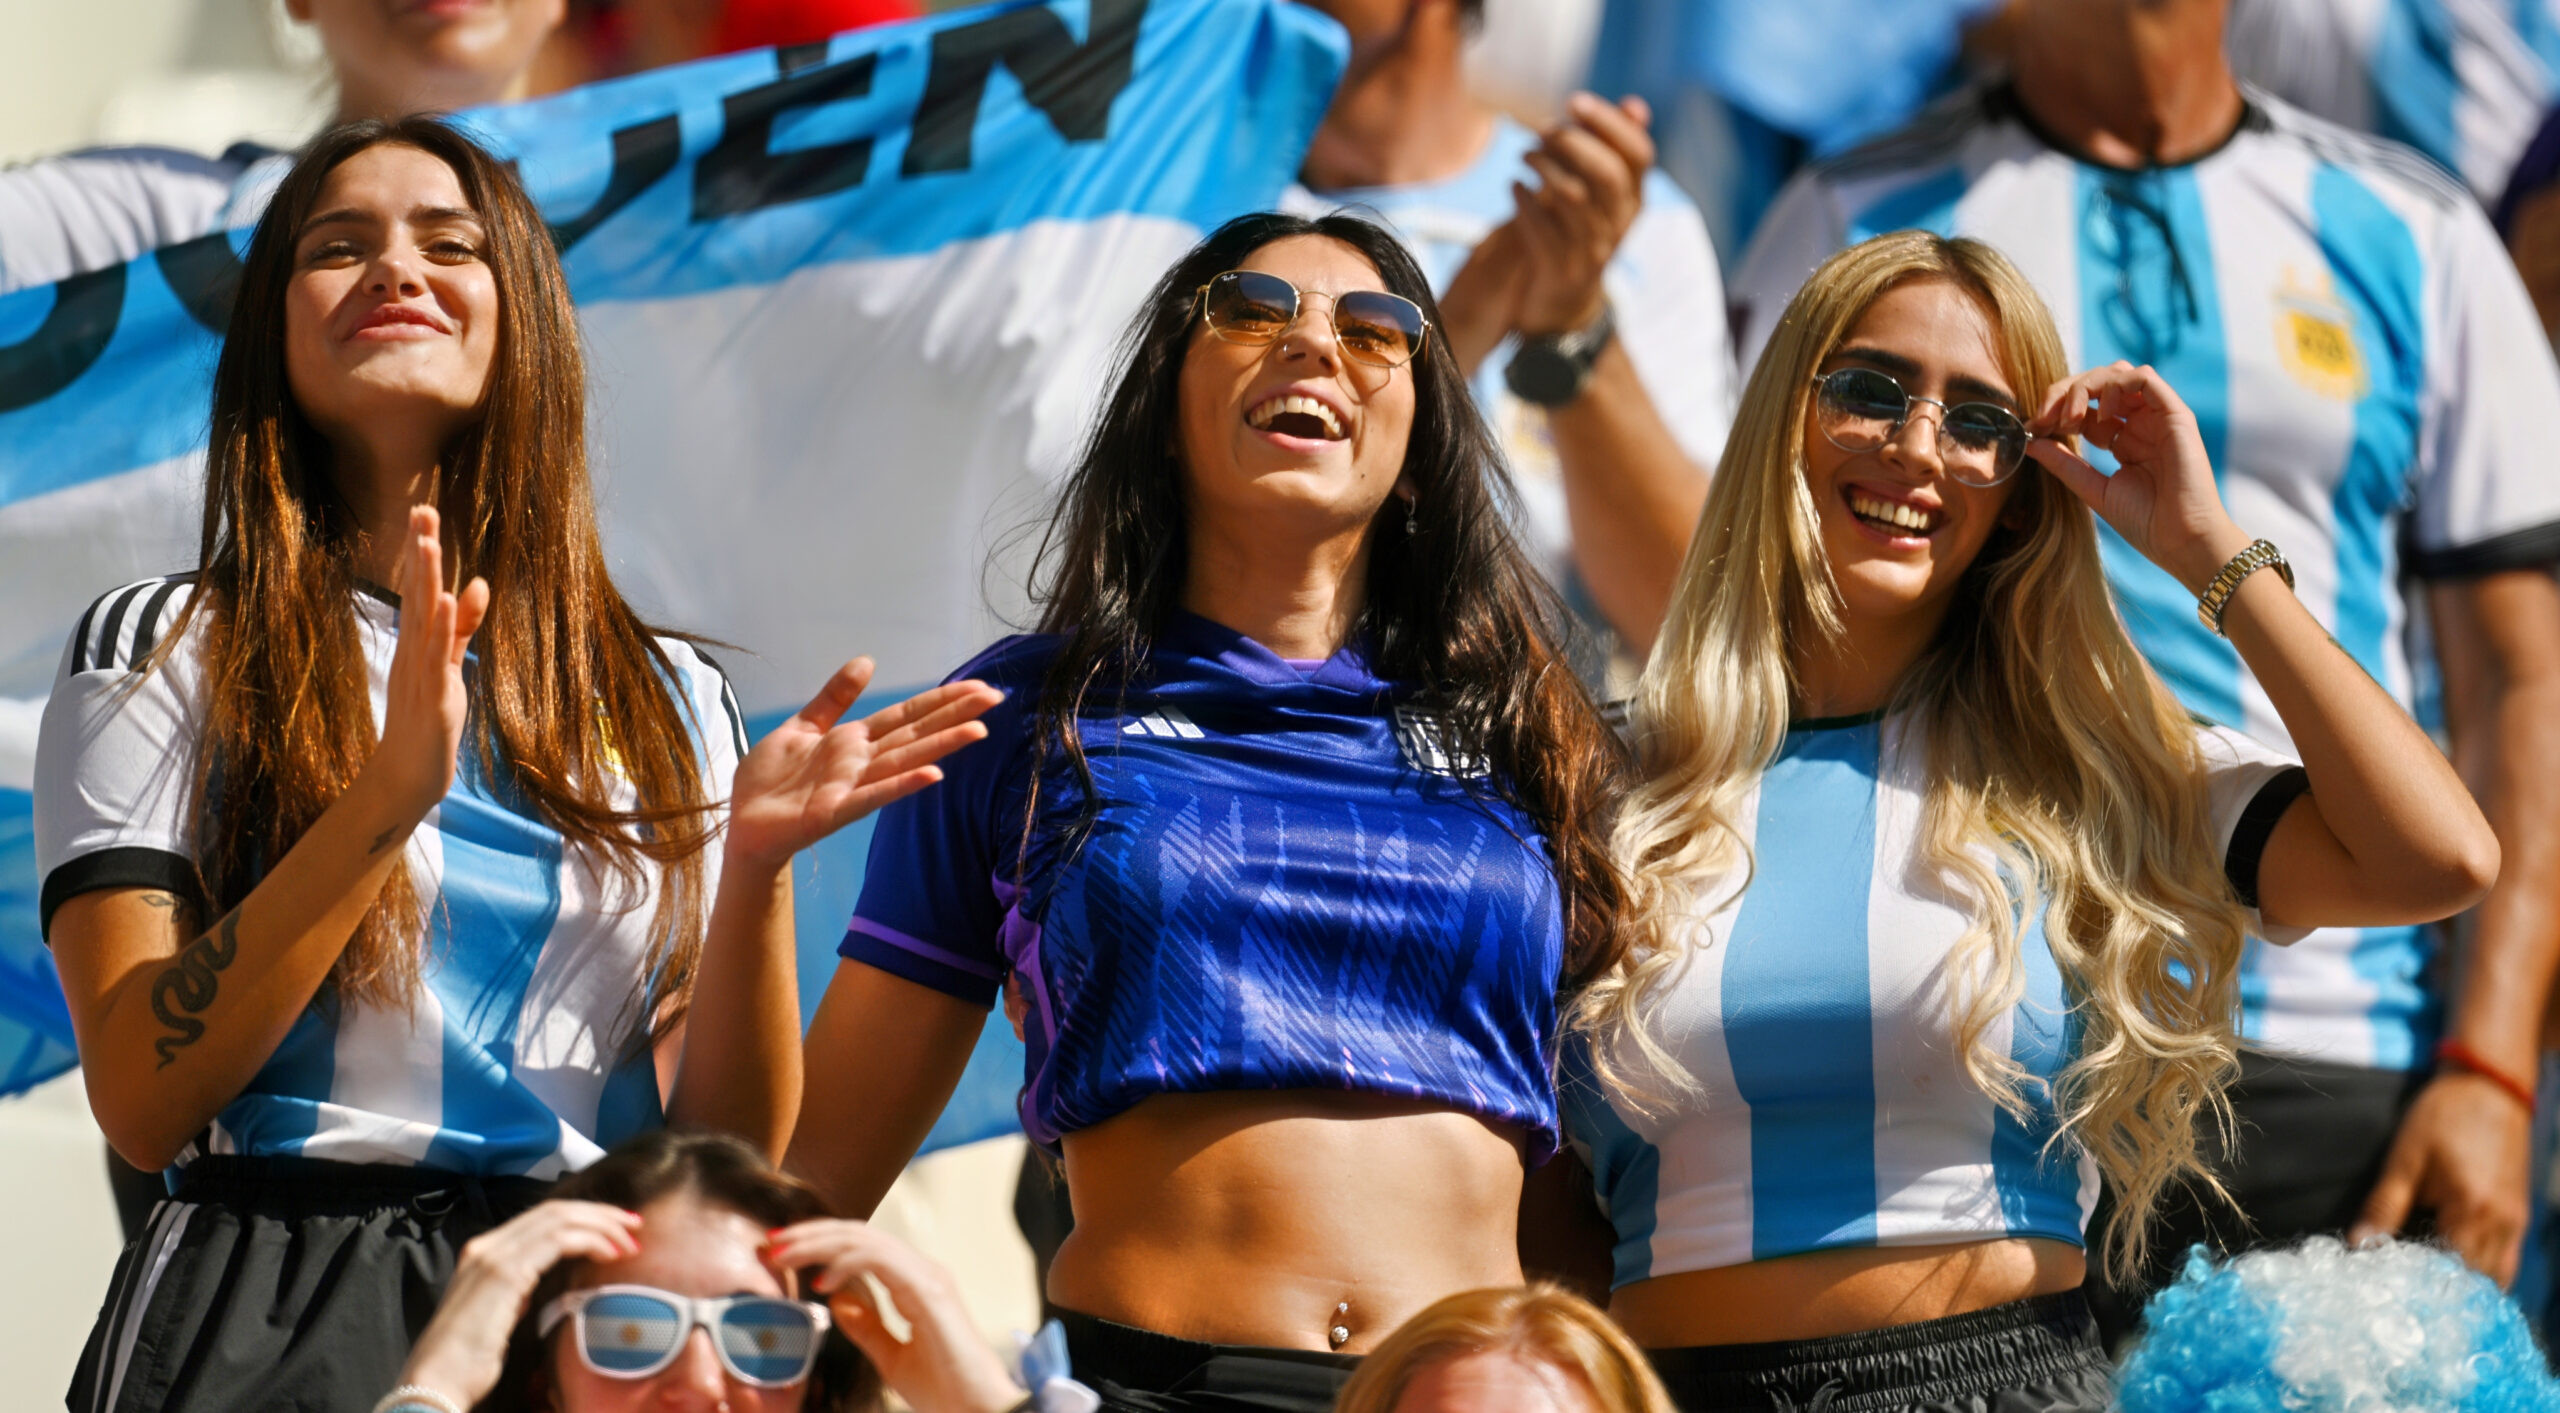 Female Argentina Fan Celebrating Topless In The Stands After World Cup Victory